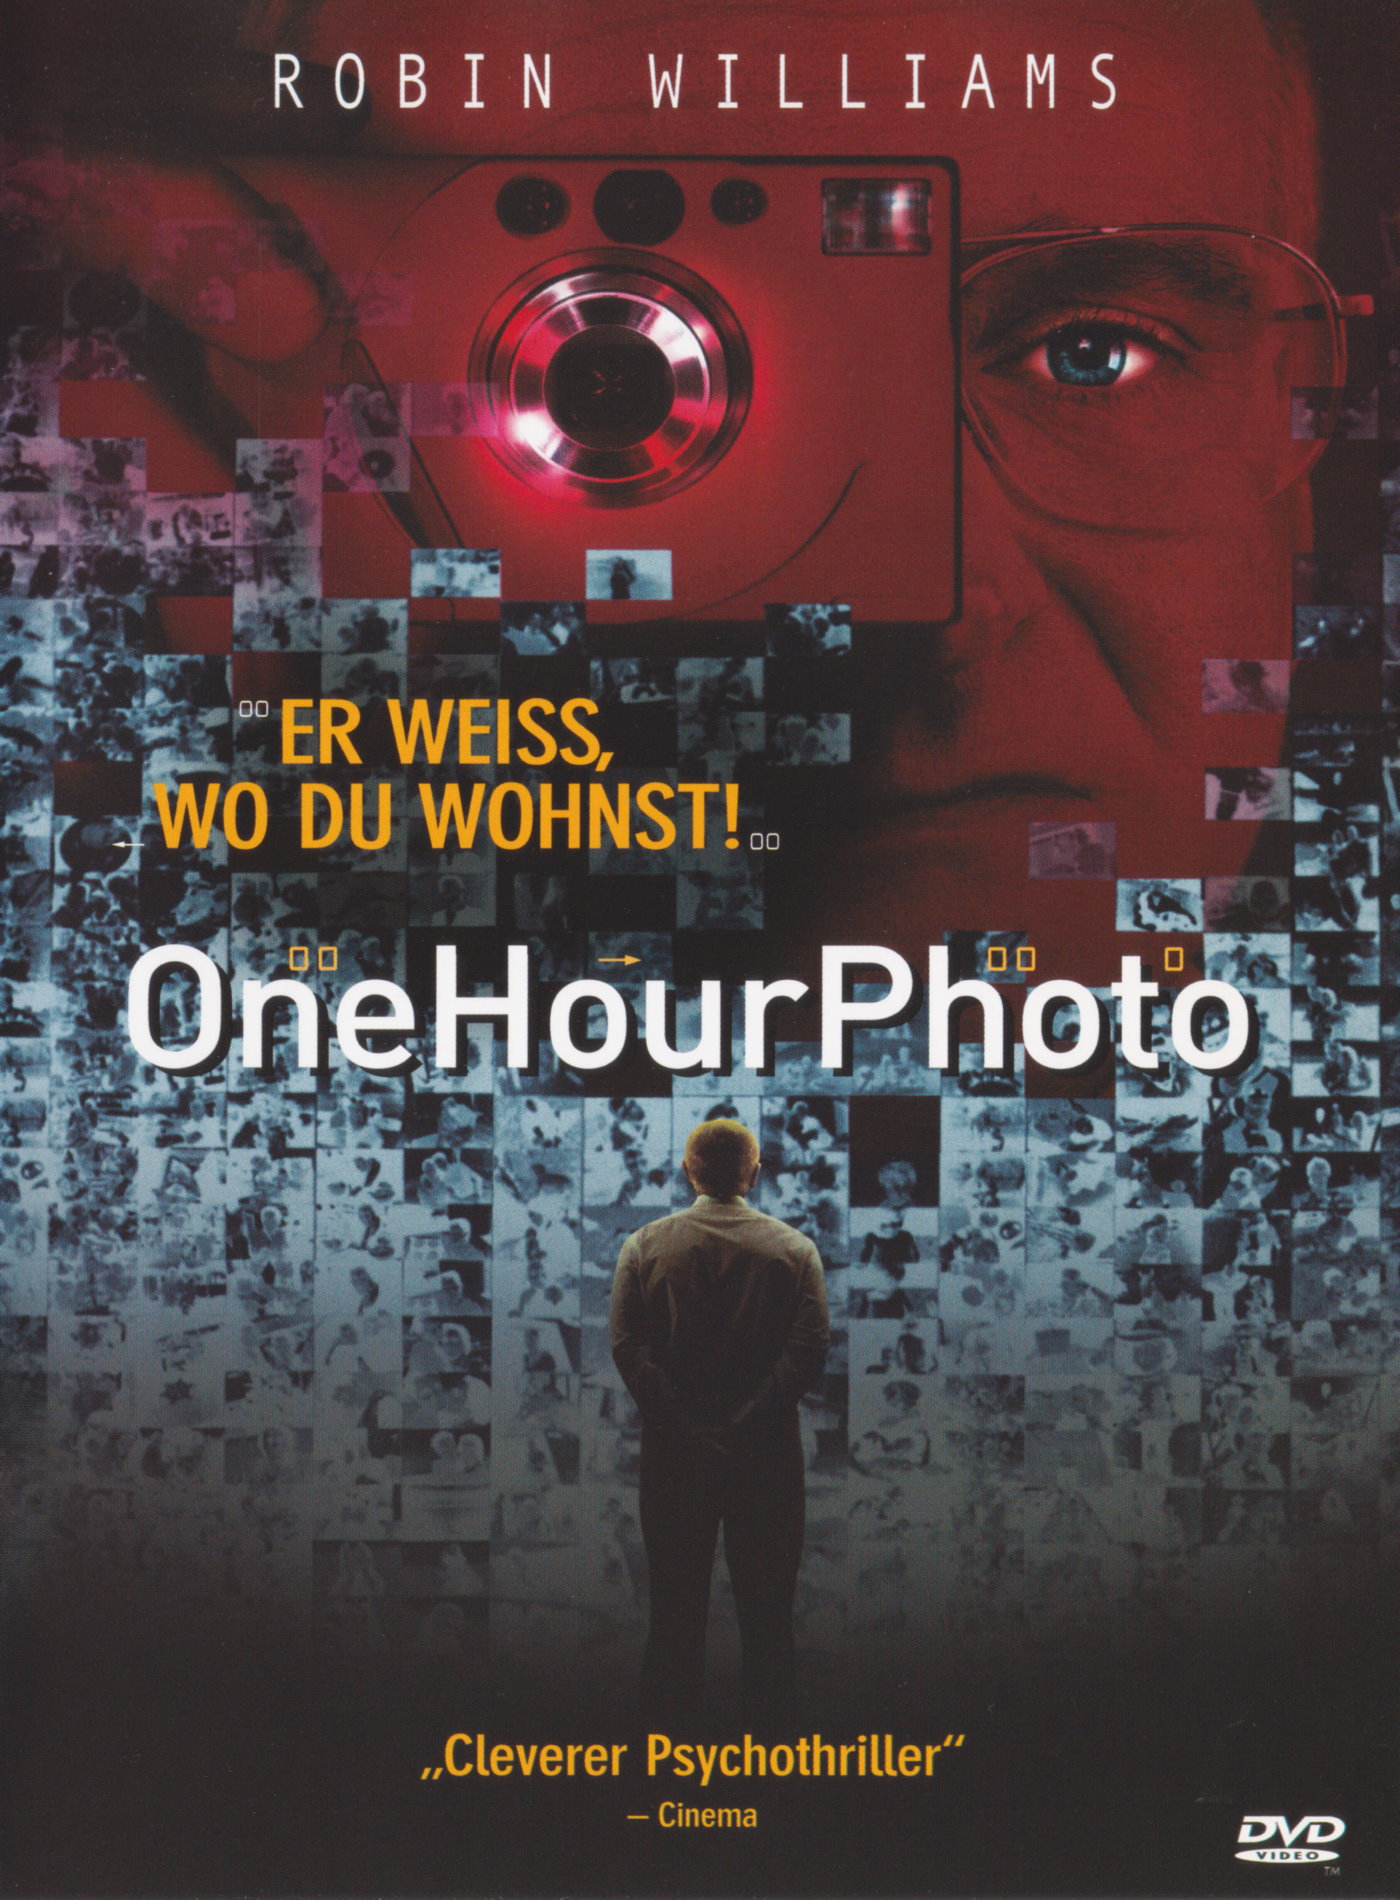 Cover - One Hour Photo.jpg